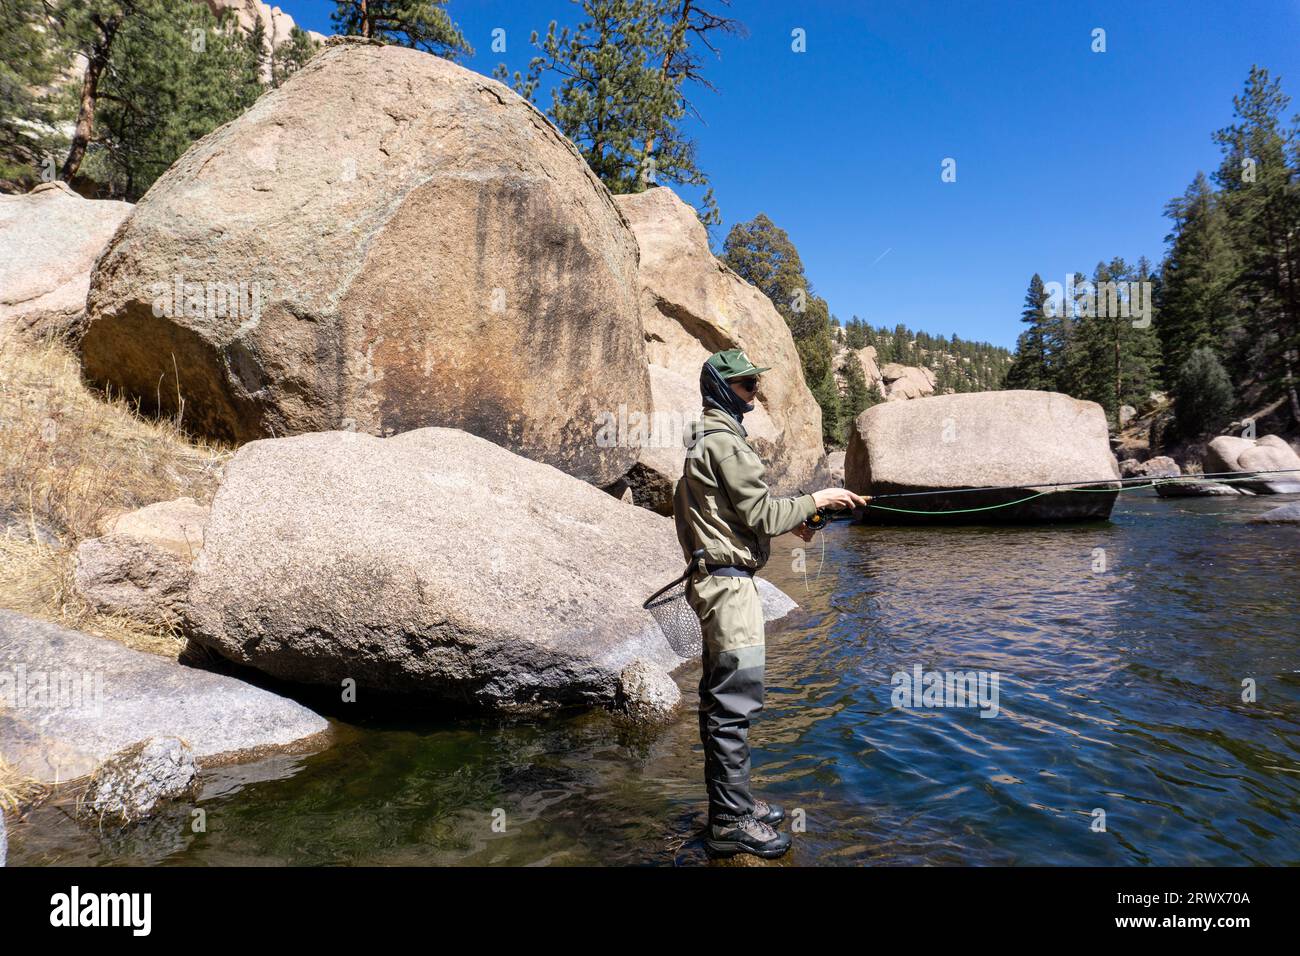 Caucasian mother and daughter fly fishing Stock Photo - Alamy